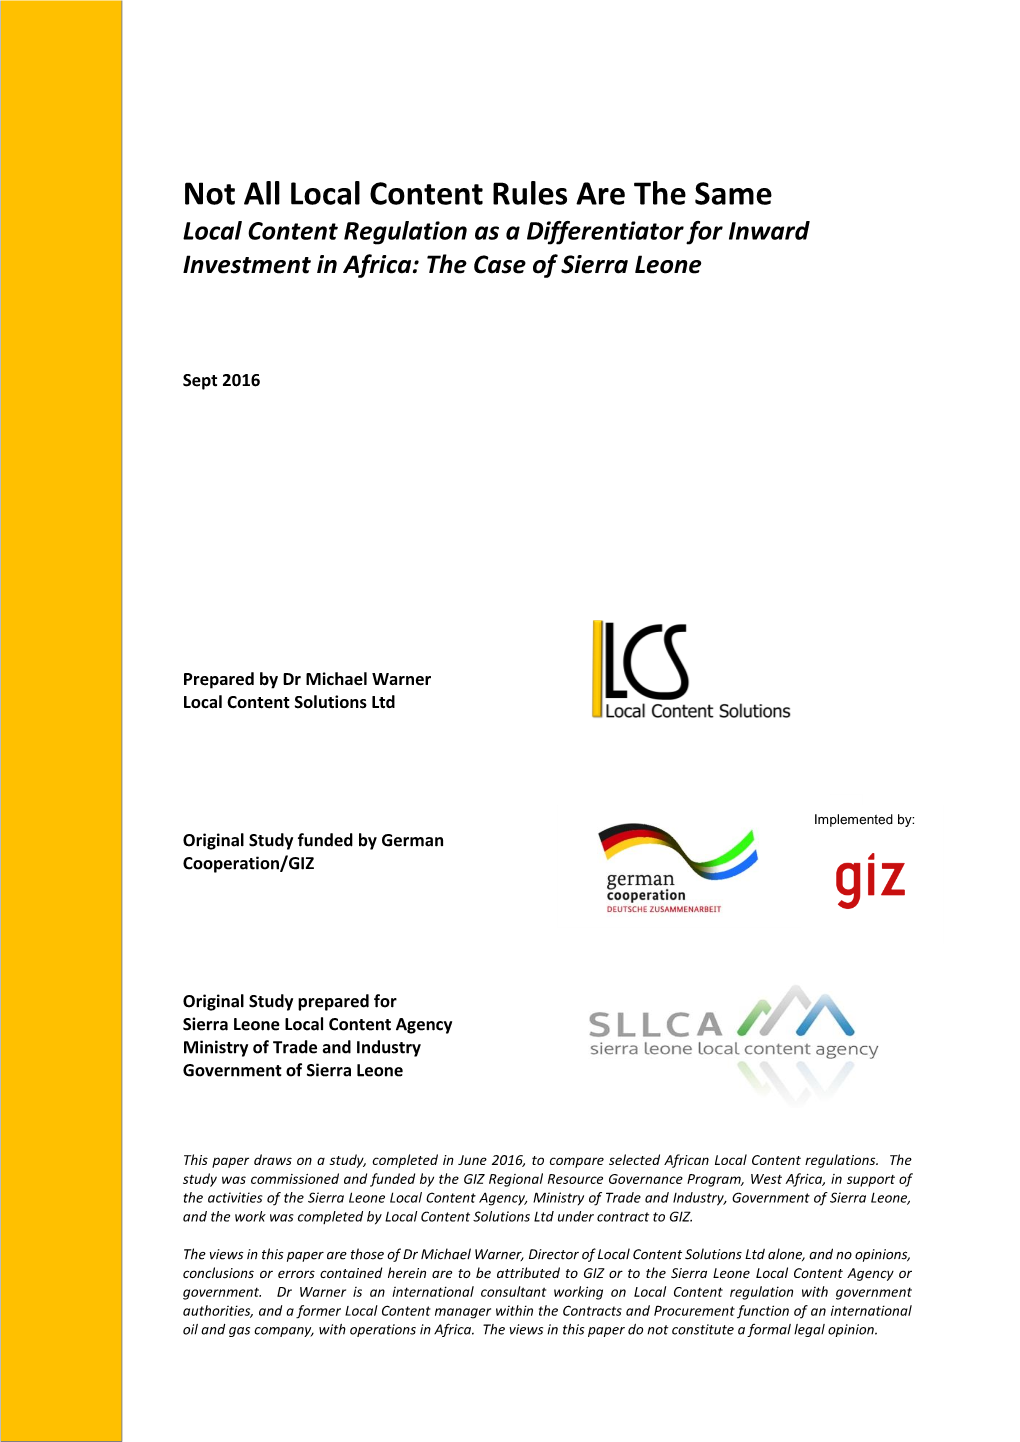 Not All Local Content Rules Are the Same Local Content Regulation As a Differentiator for Inward Investment in Africa: the Case of Sierra Leone